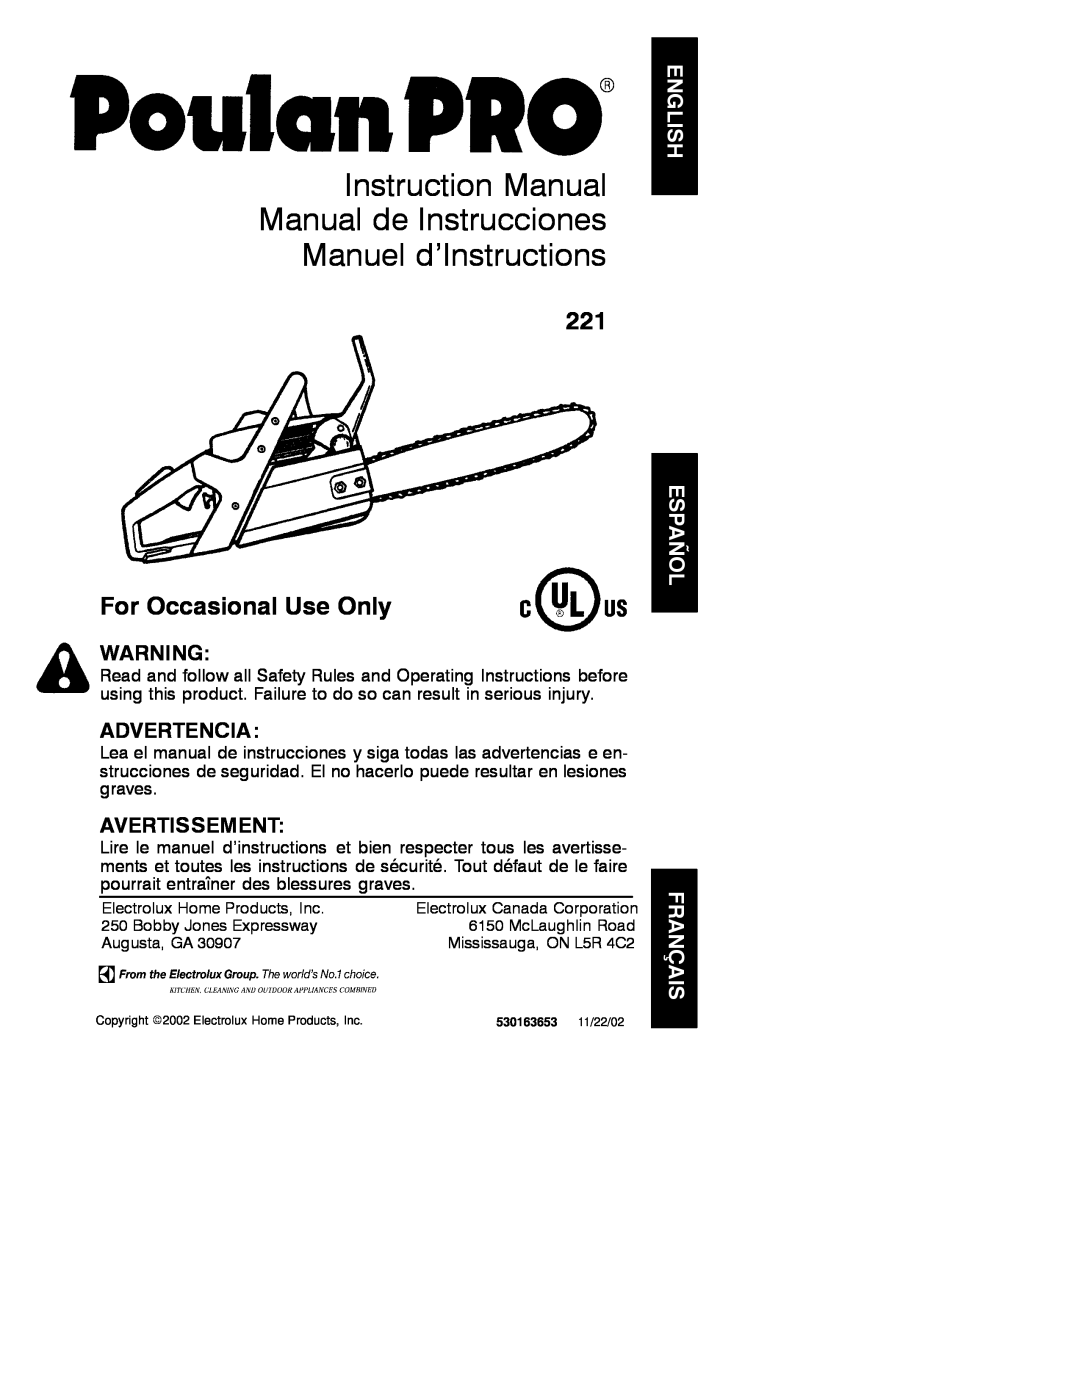 Poulan 530163653 instruction manual Manuel d’Instructions, For Occasional Use Only, Advertencia, Avertissement 